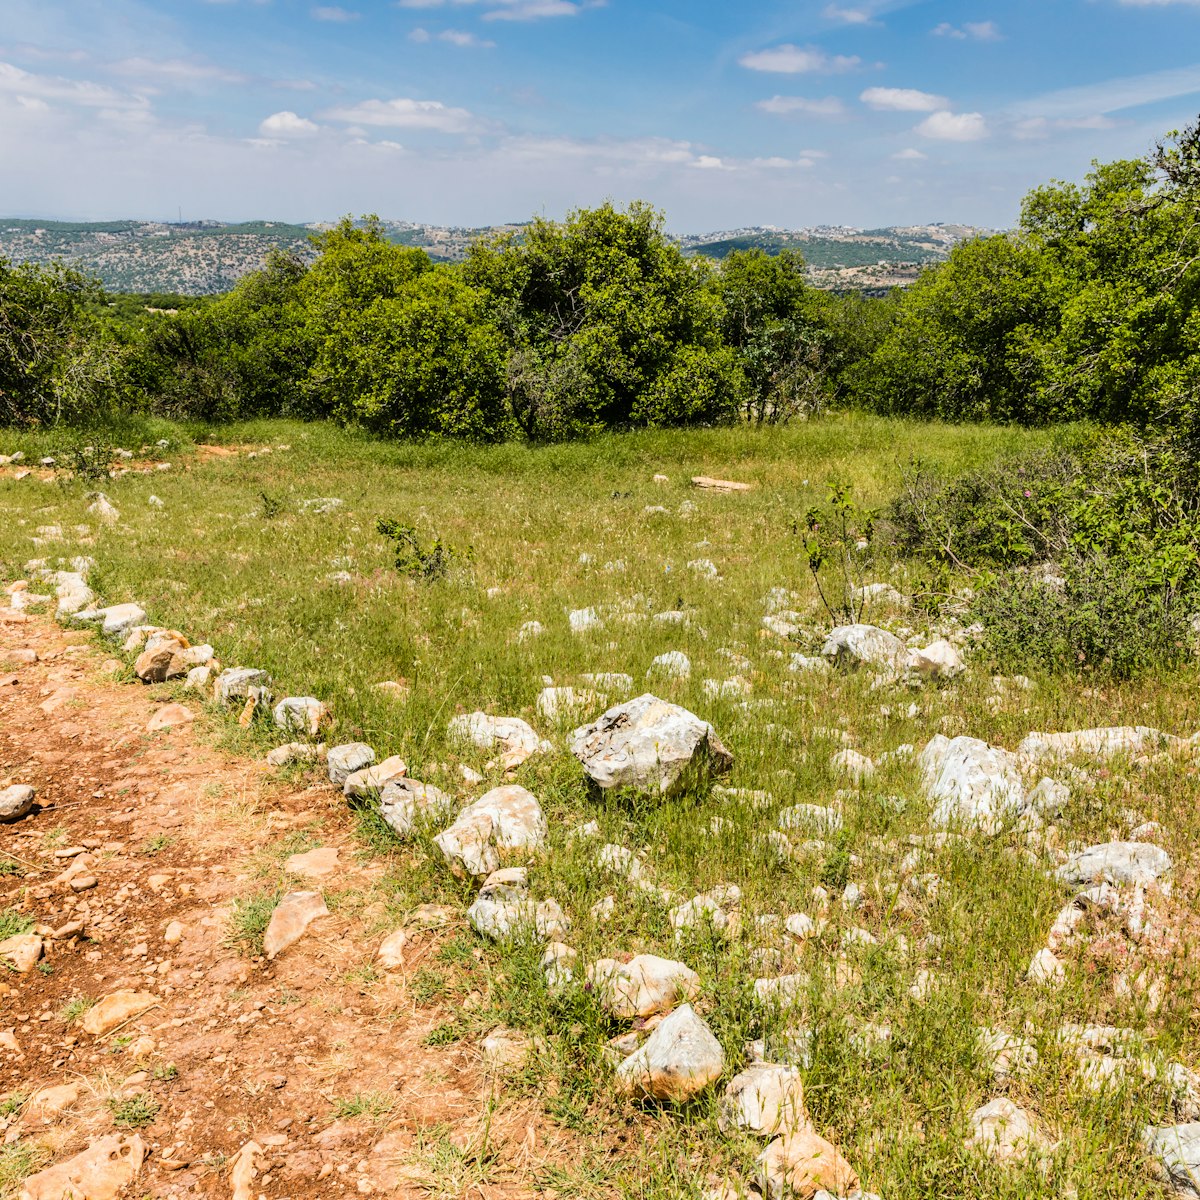 View from the Roe Deer Trail in The Ajloun Forest Reserve.